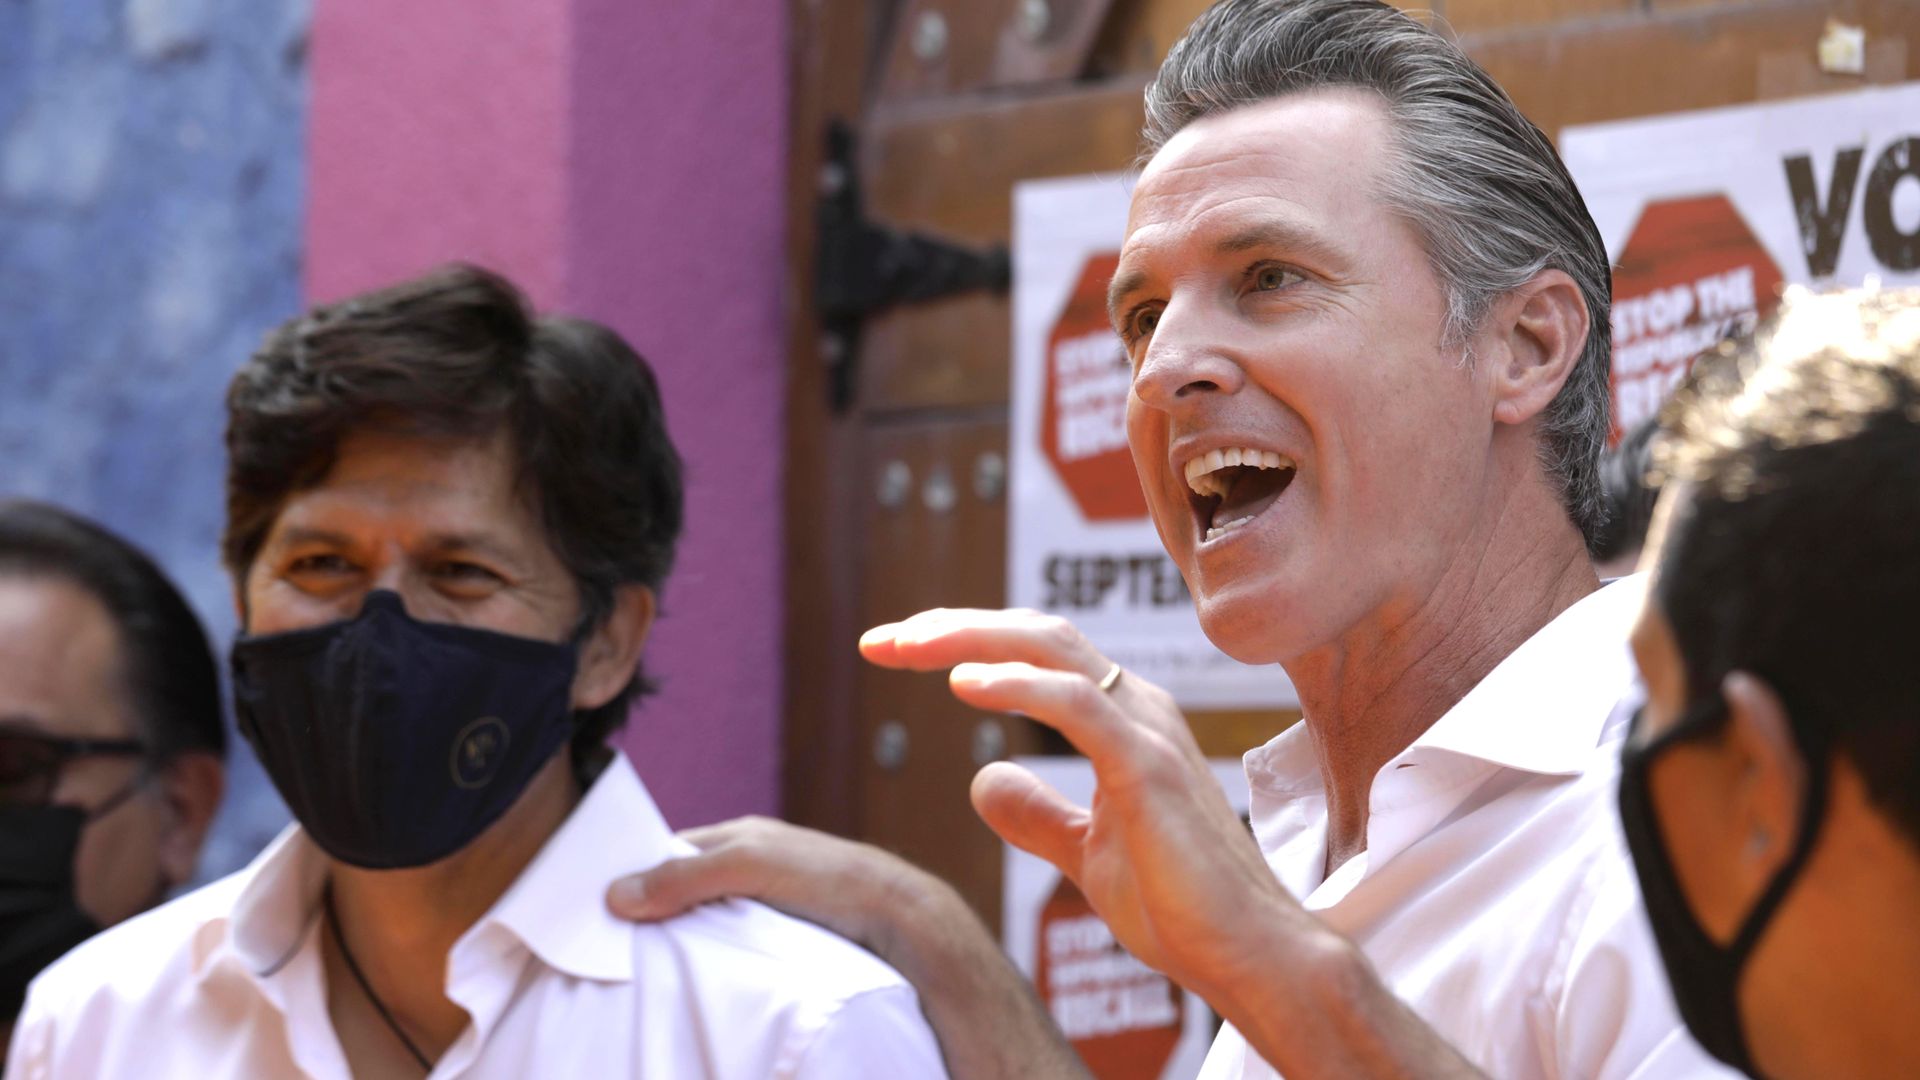 California Gov. Gavin Newsom (D) meets with Latino leaders at Hecho en Mexico restaurant in East Los Angeles. Photo: Genaro Molina/Los Angeles Times via Getty Images